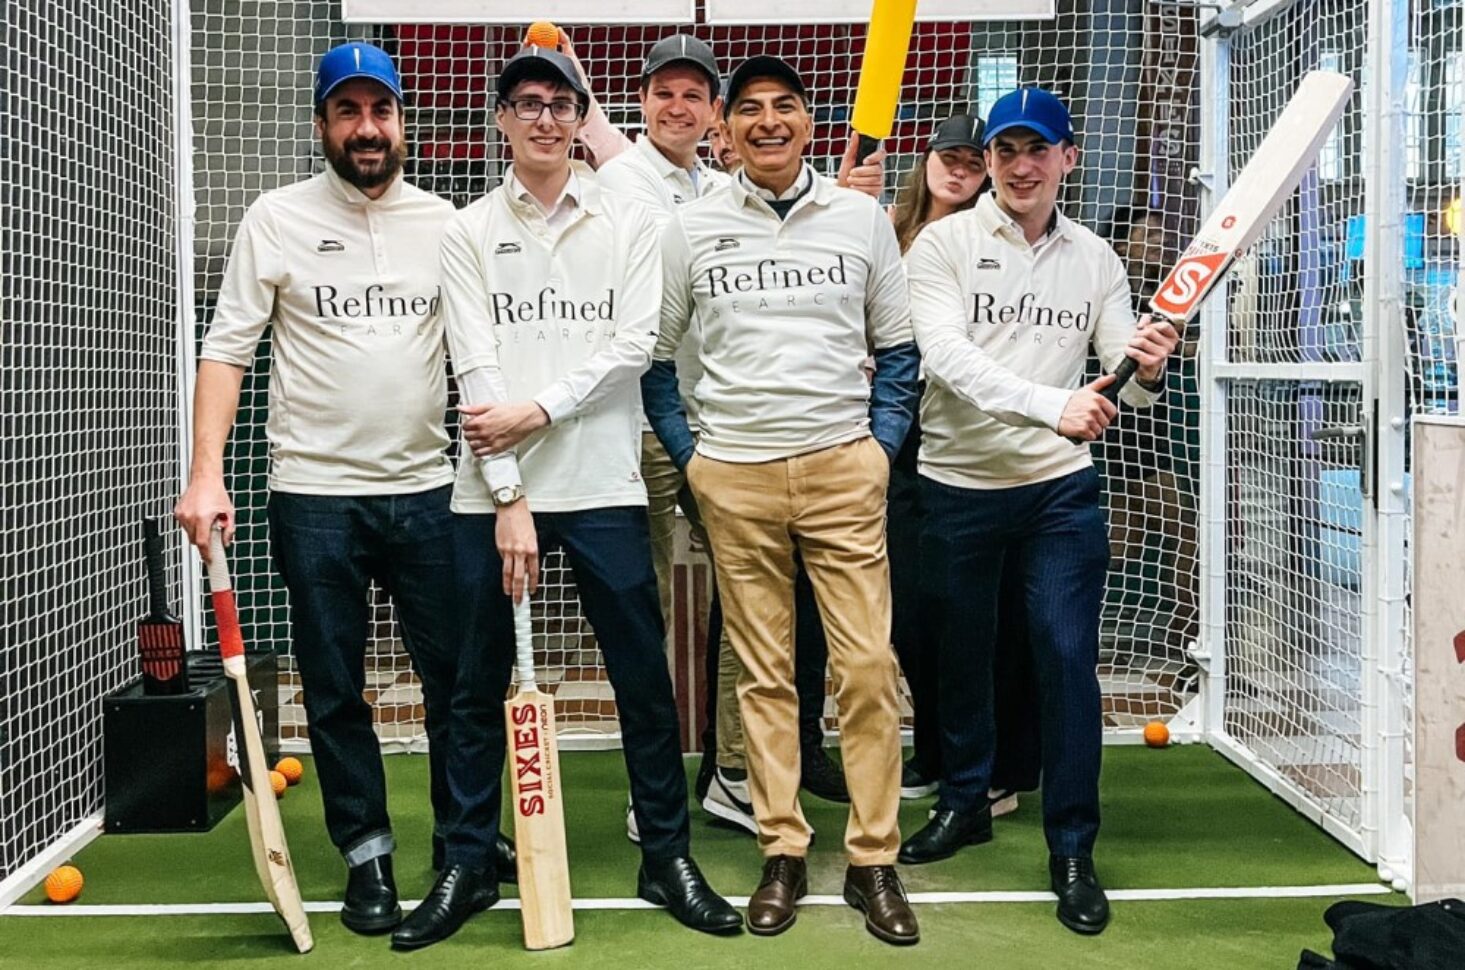 Making Cricket Accessible to Everyone